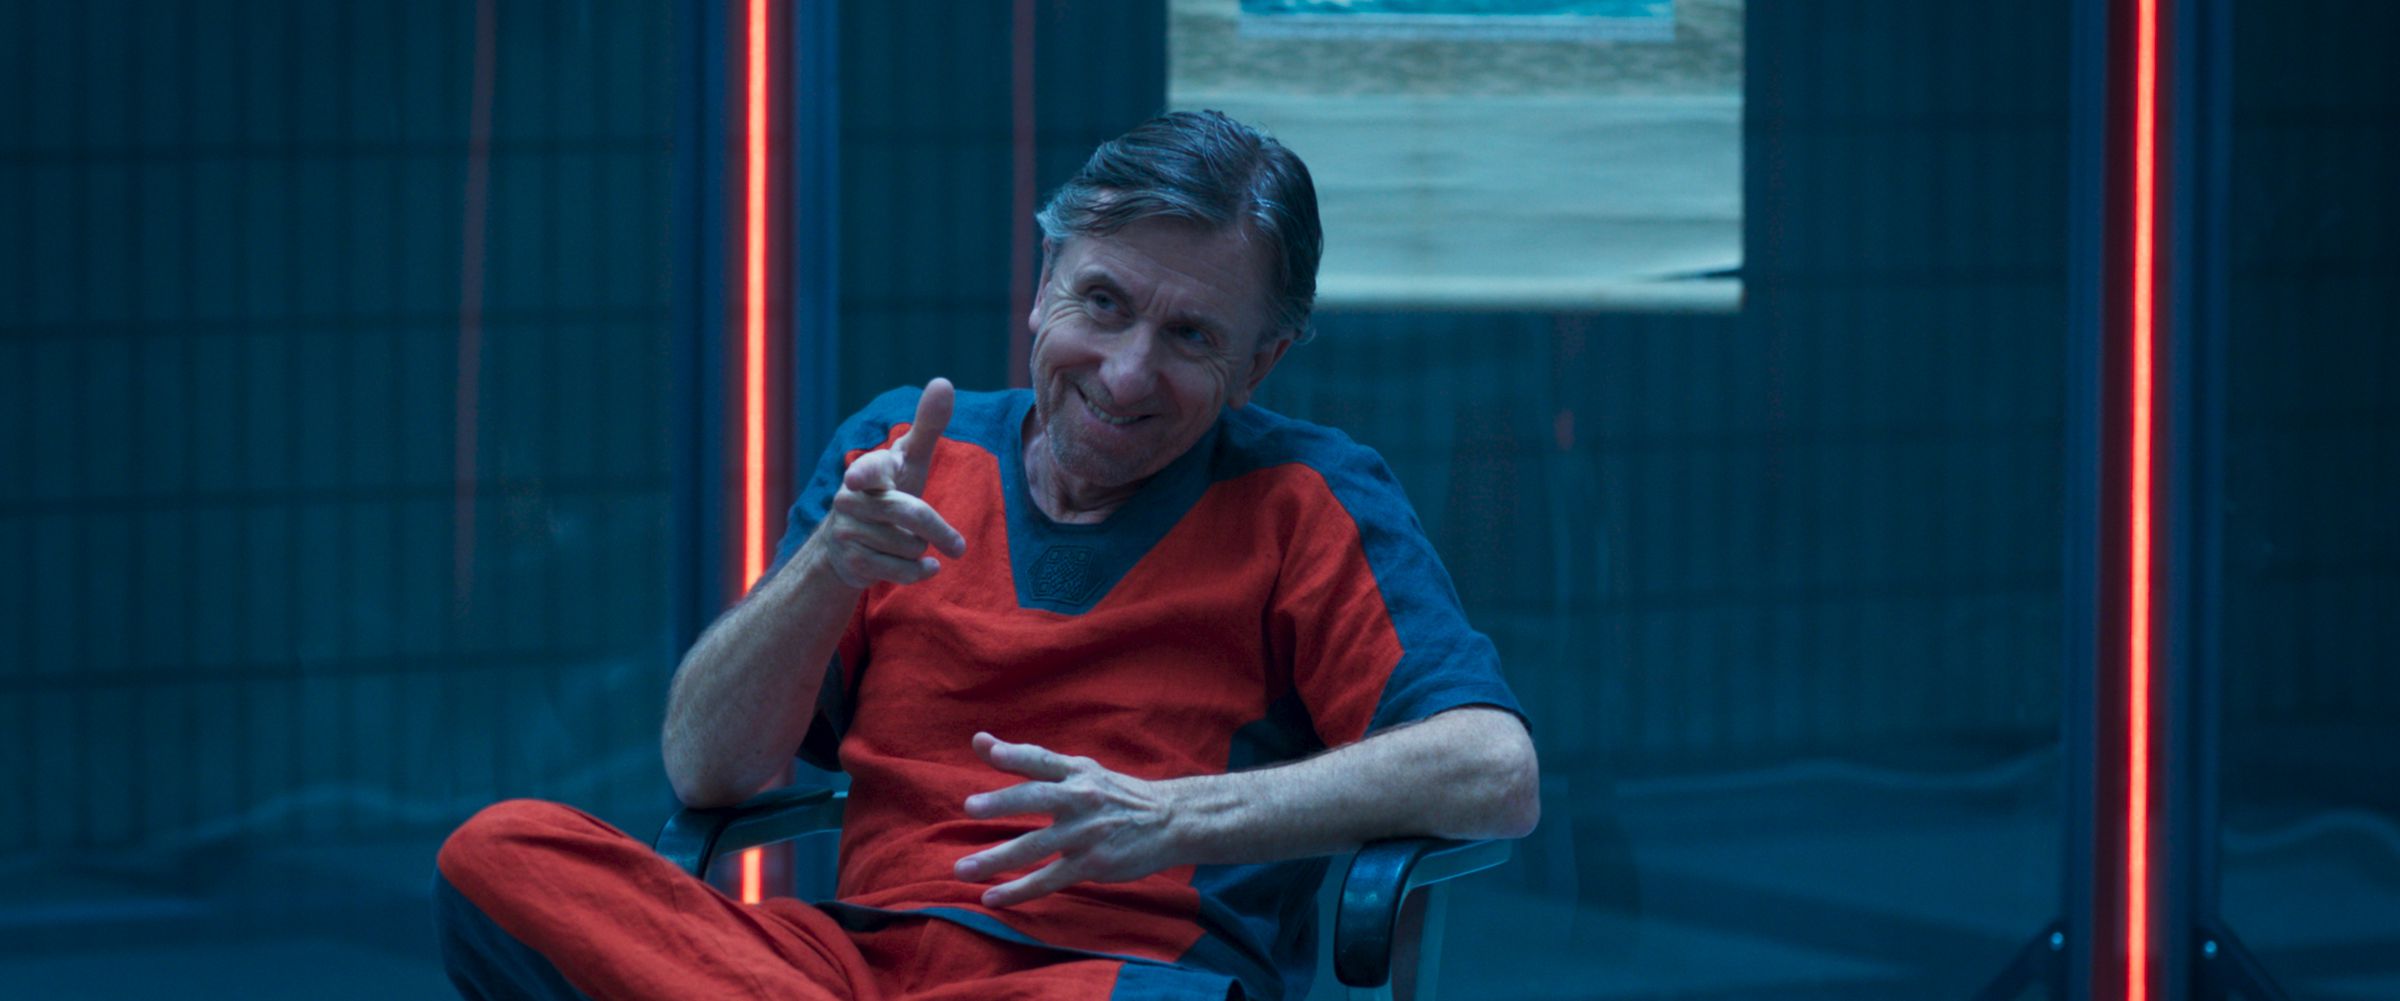 Tim Roth sitting in a plexiglass enclosure, sitting in a chair, and wearing a stylish prisoner’s uniform.